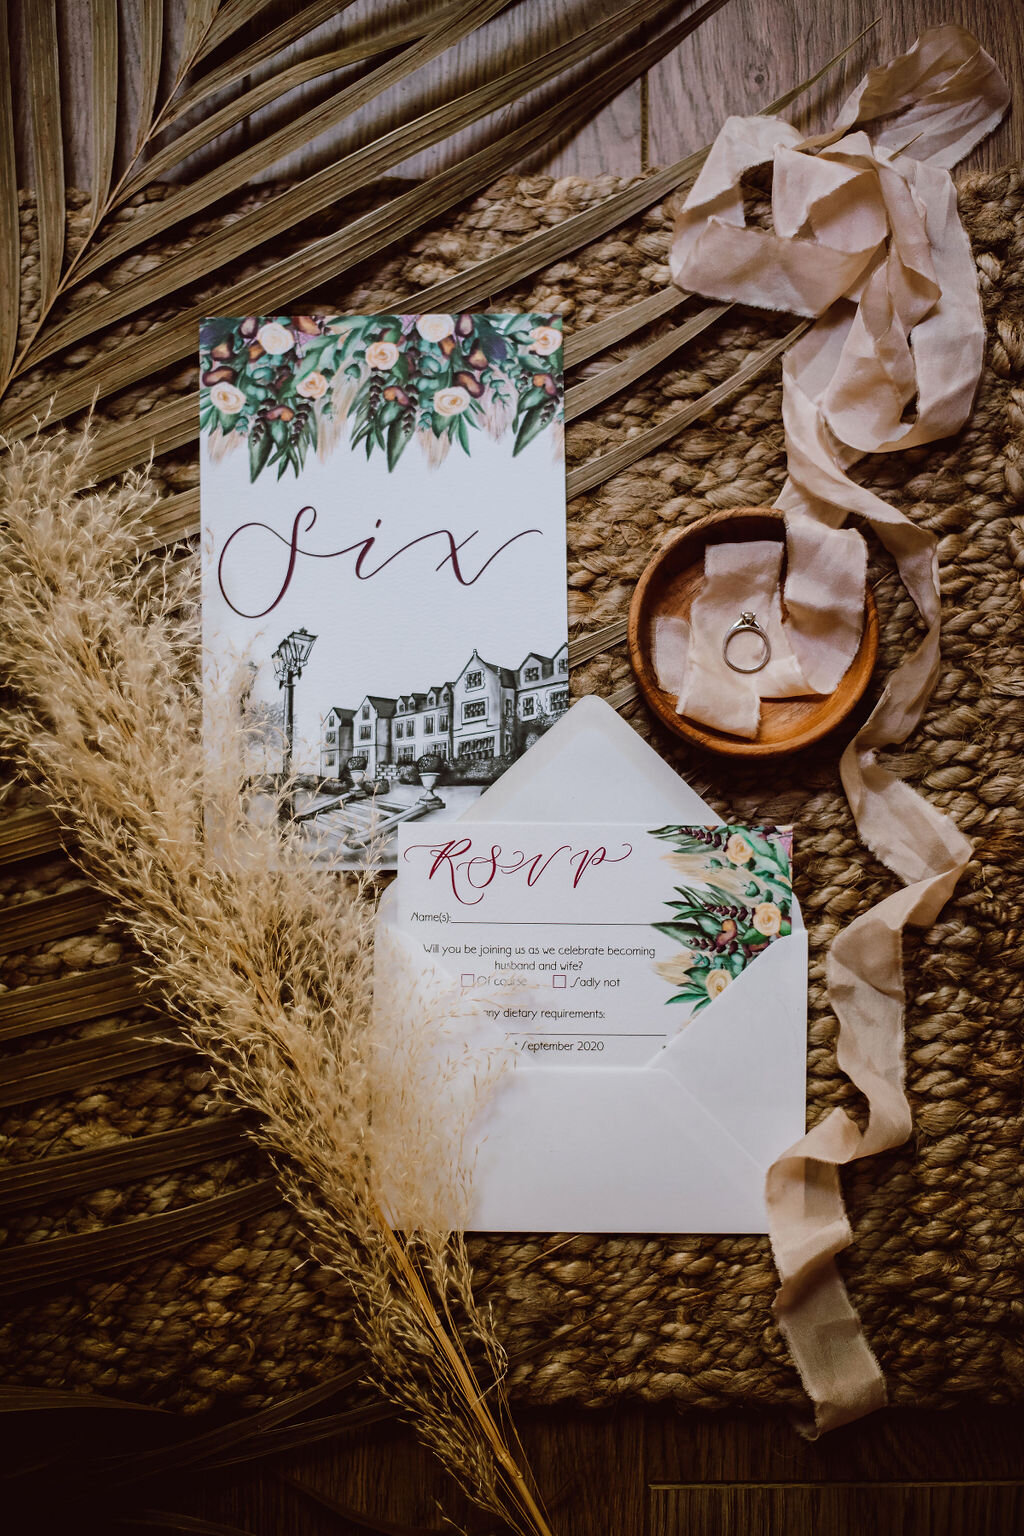 South Lodge hotel boho wedding burgundy table number and RSVP card venue illustration, calligraphy and painted florals, pampass grass, thistles and roses..jpg